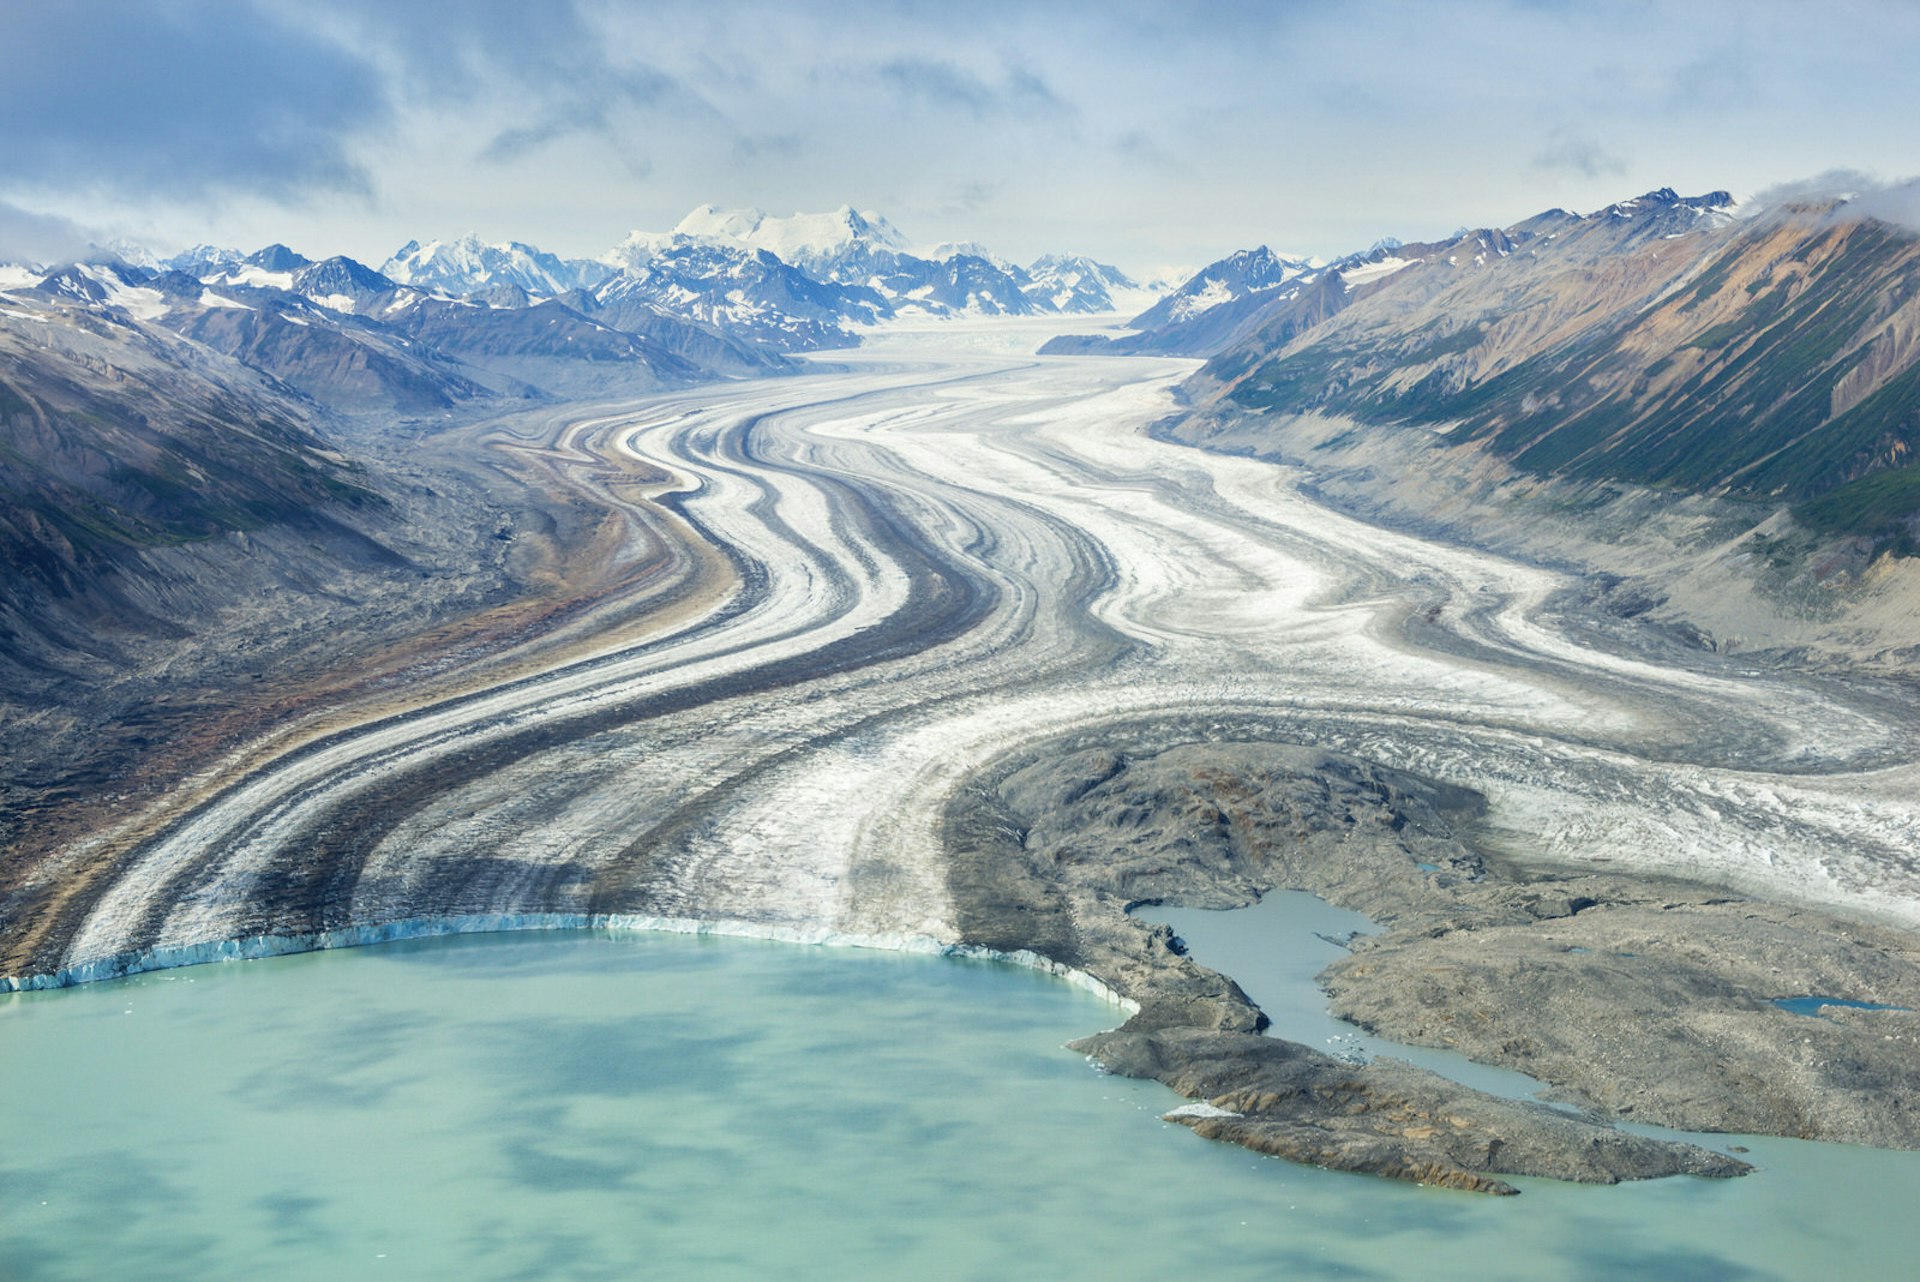 The terminus of the Kluane glacier; the distance from the top to bottom is equivalent to the height of a 10-storey building © Justin Foulkes / Lonely Planet